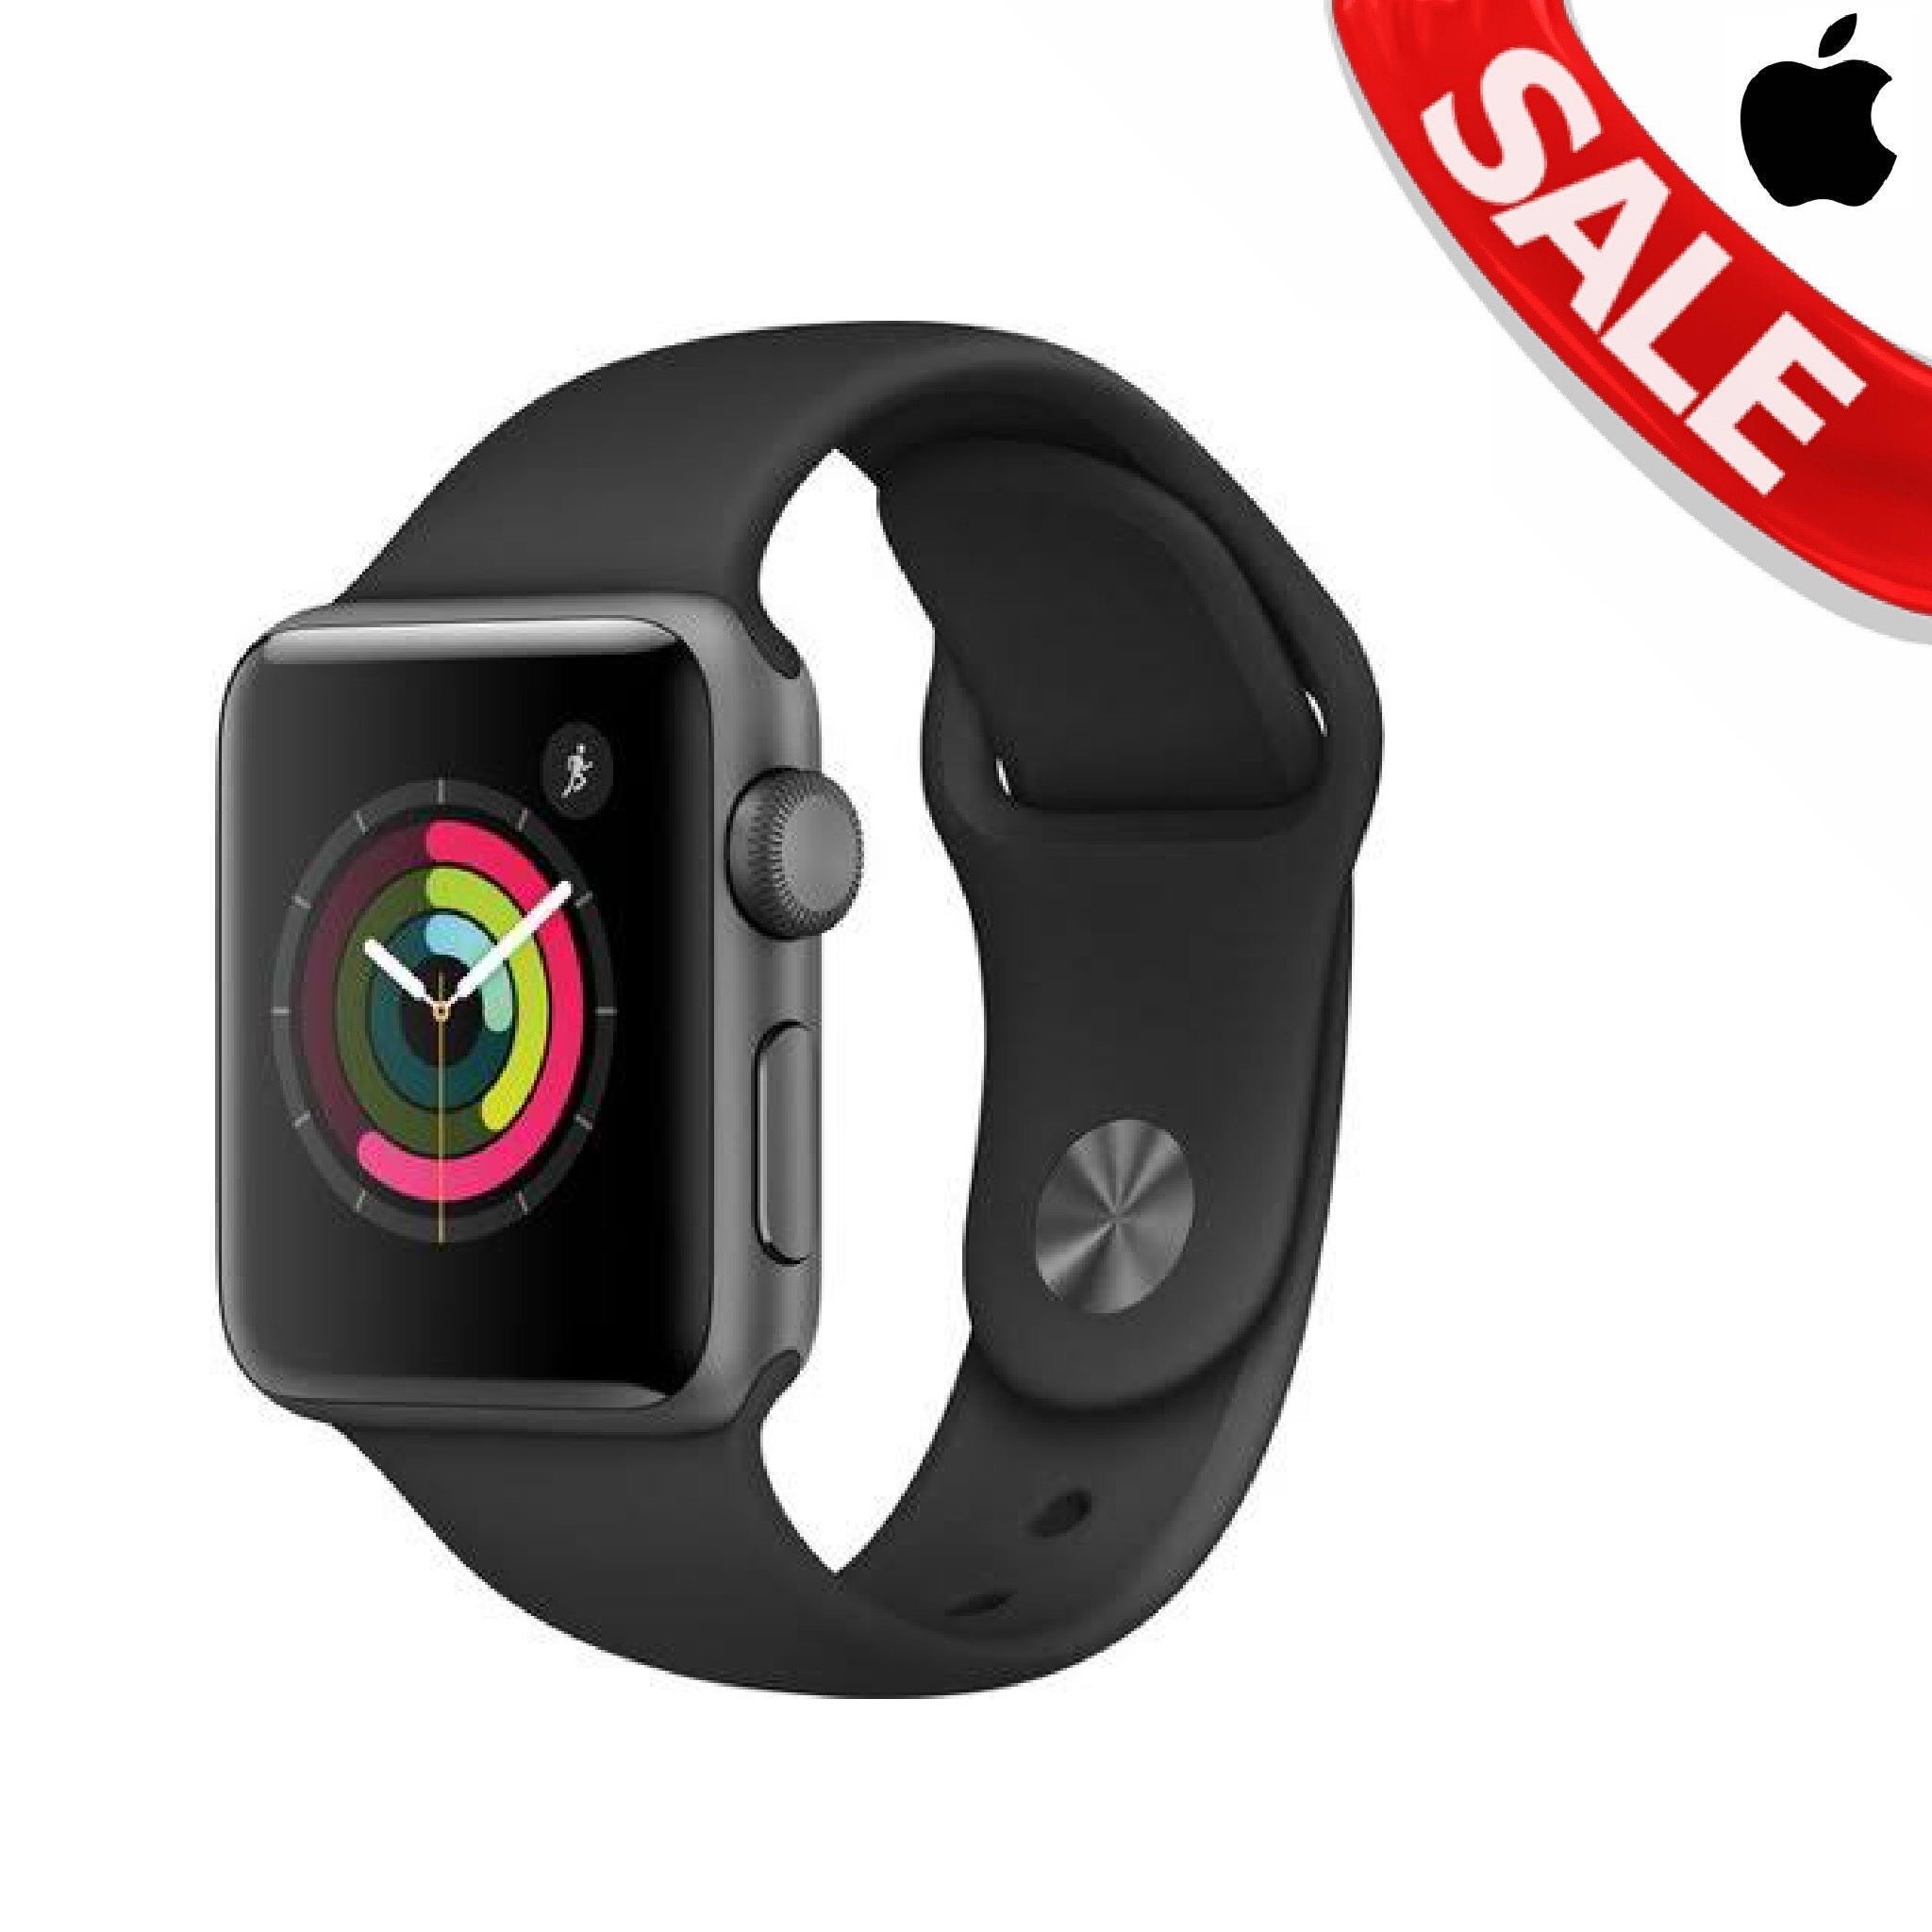 Apple Watch Series One Cost Flash Sales, 58% OFF 